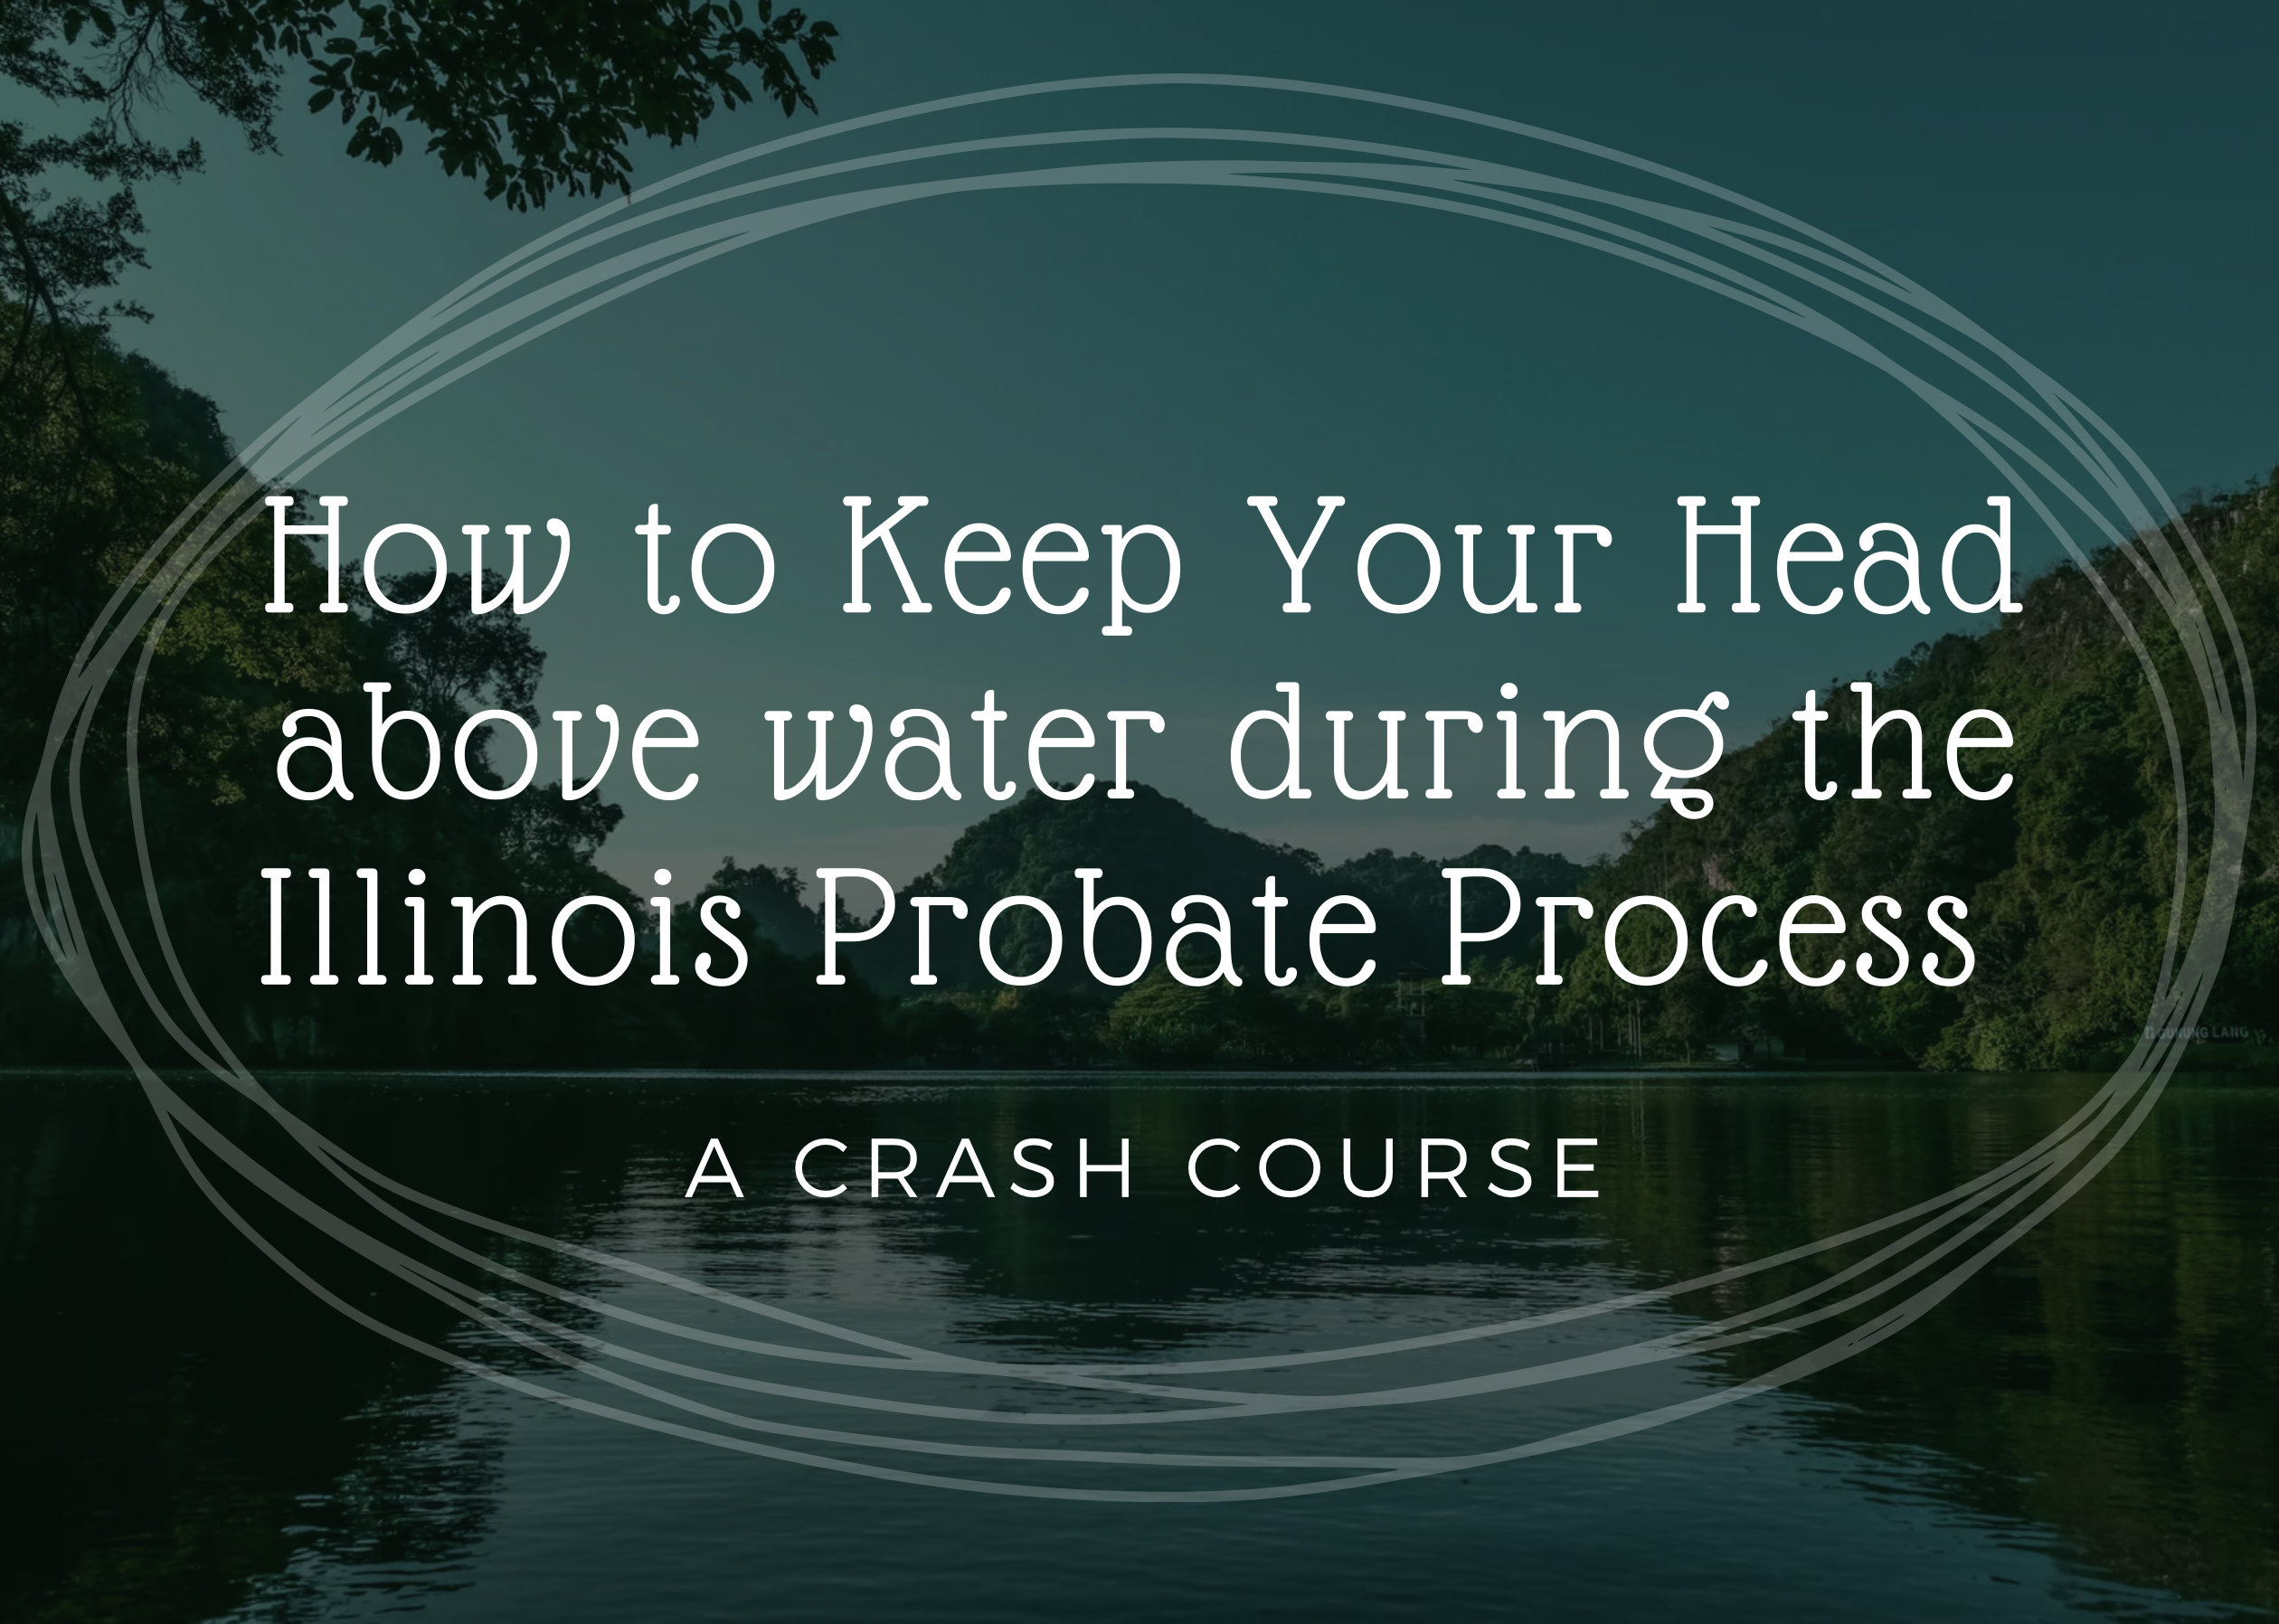 How to Keep Your Head above water during the Illinois Probate Process, a crash course